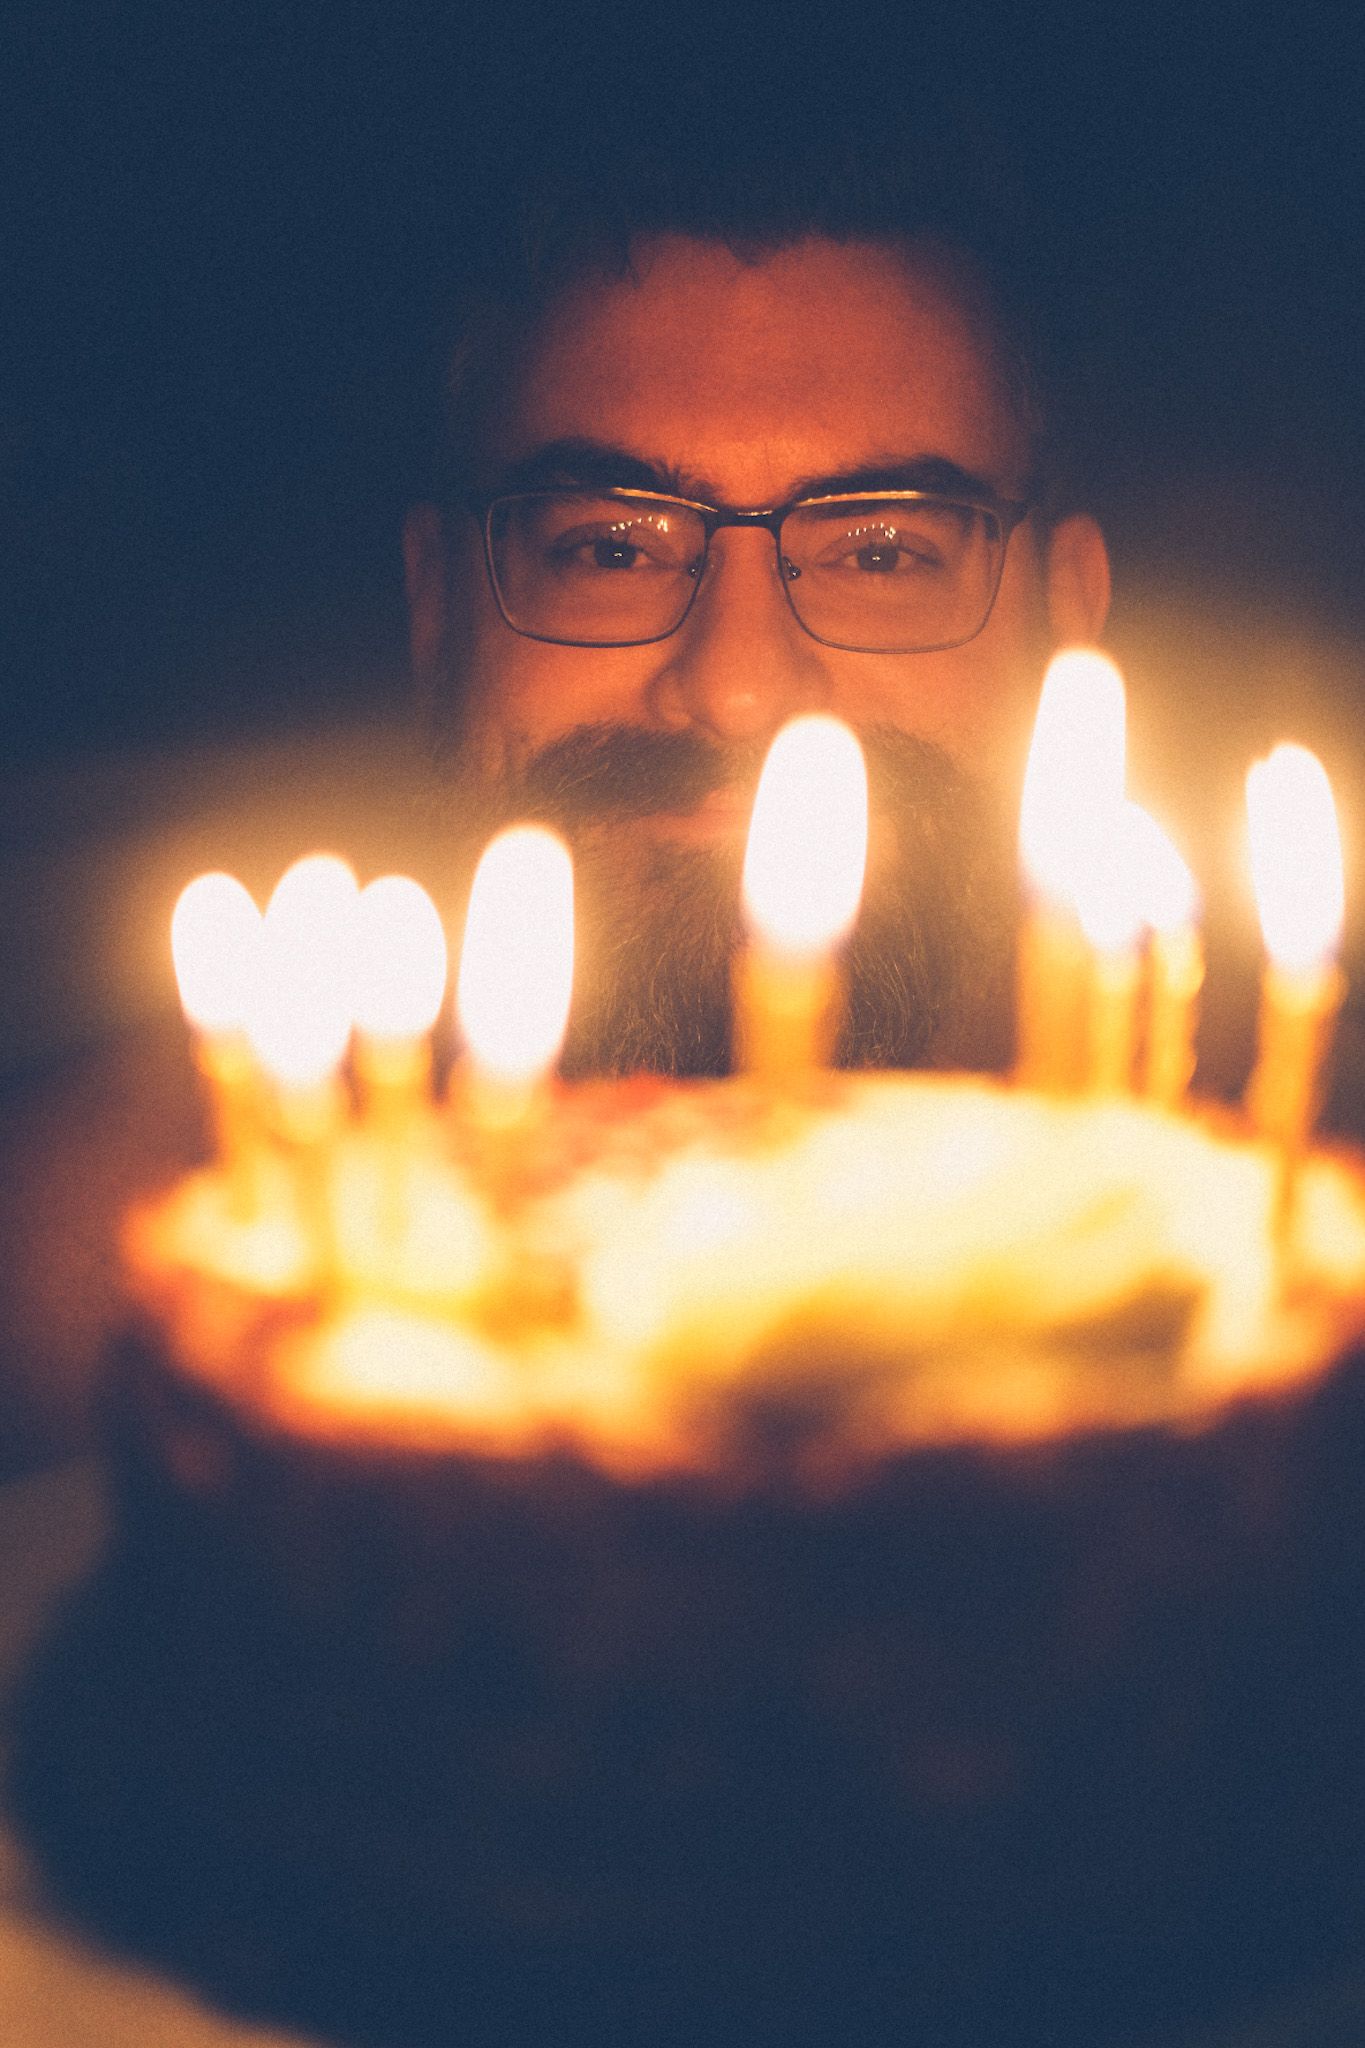 A bearded man with dark hair and glasses smiles from behind lit candles on a birthday cake, glowing, warmly lit.